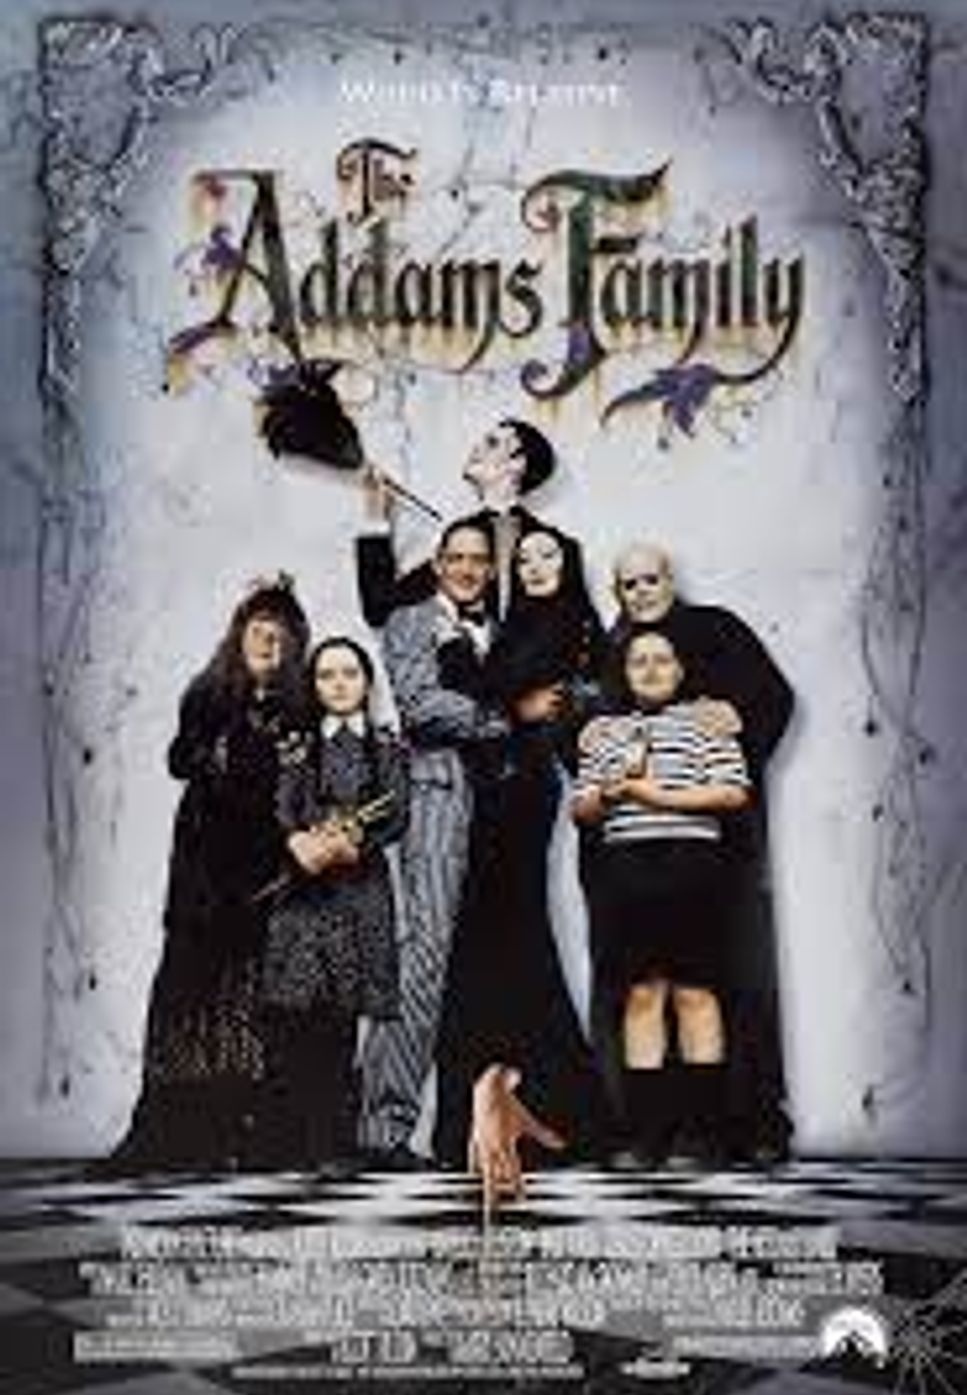 Vizy Miccy - Th addams family soundtrack by Bagus Tandayu